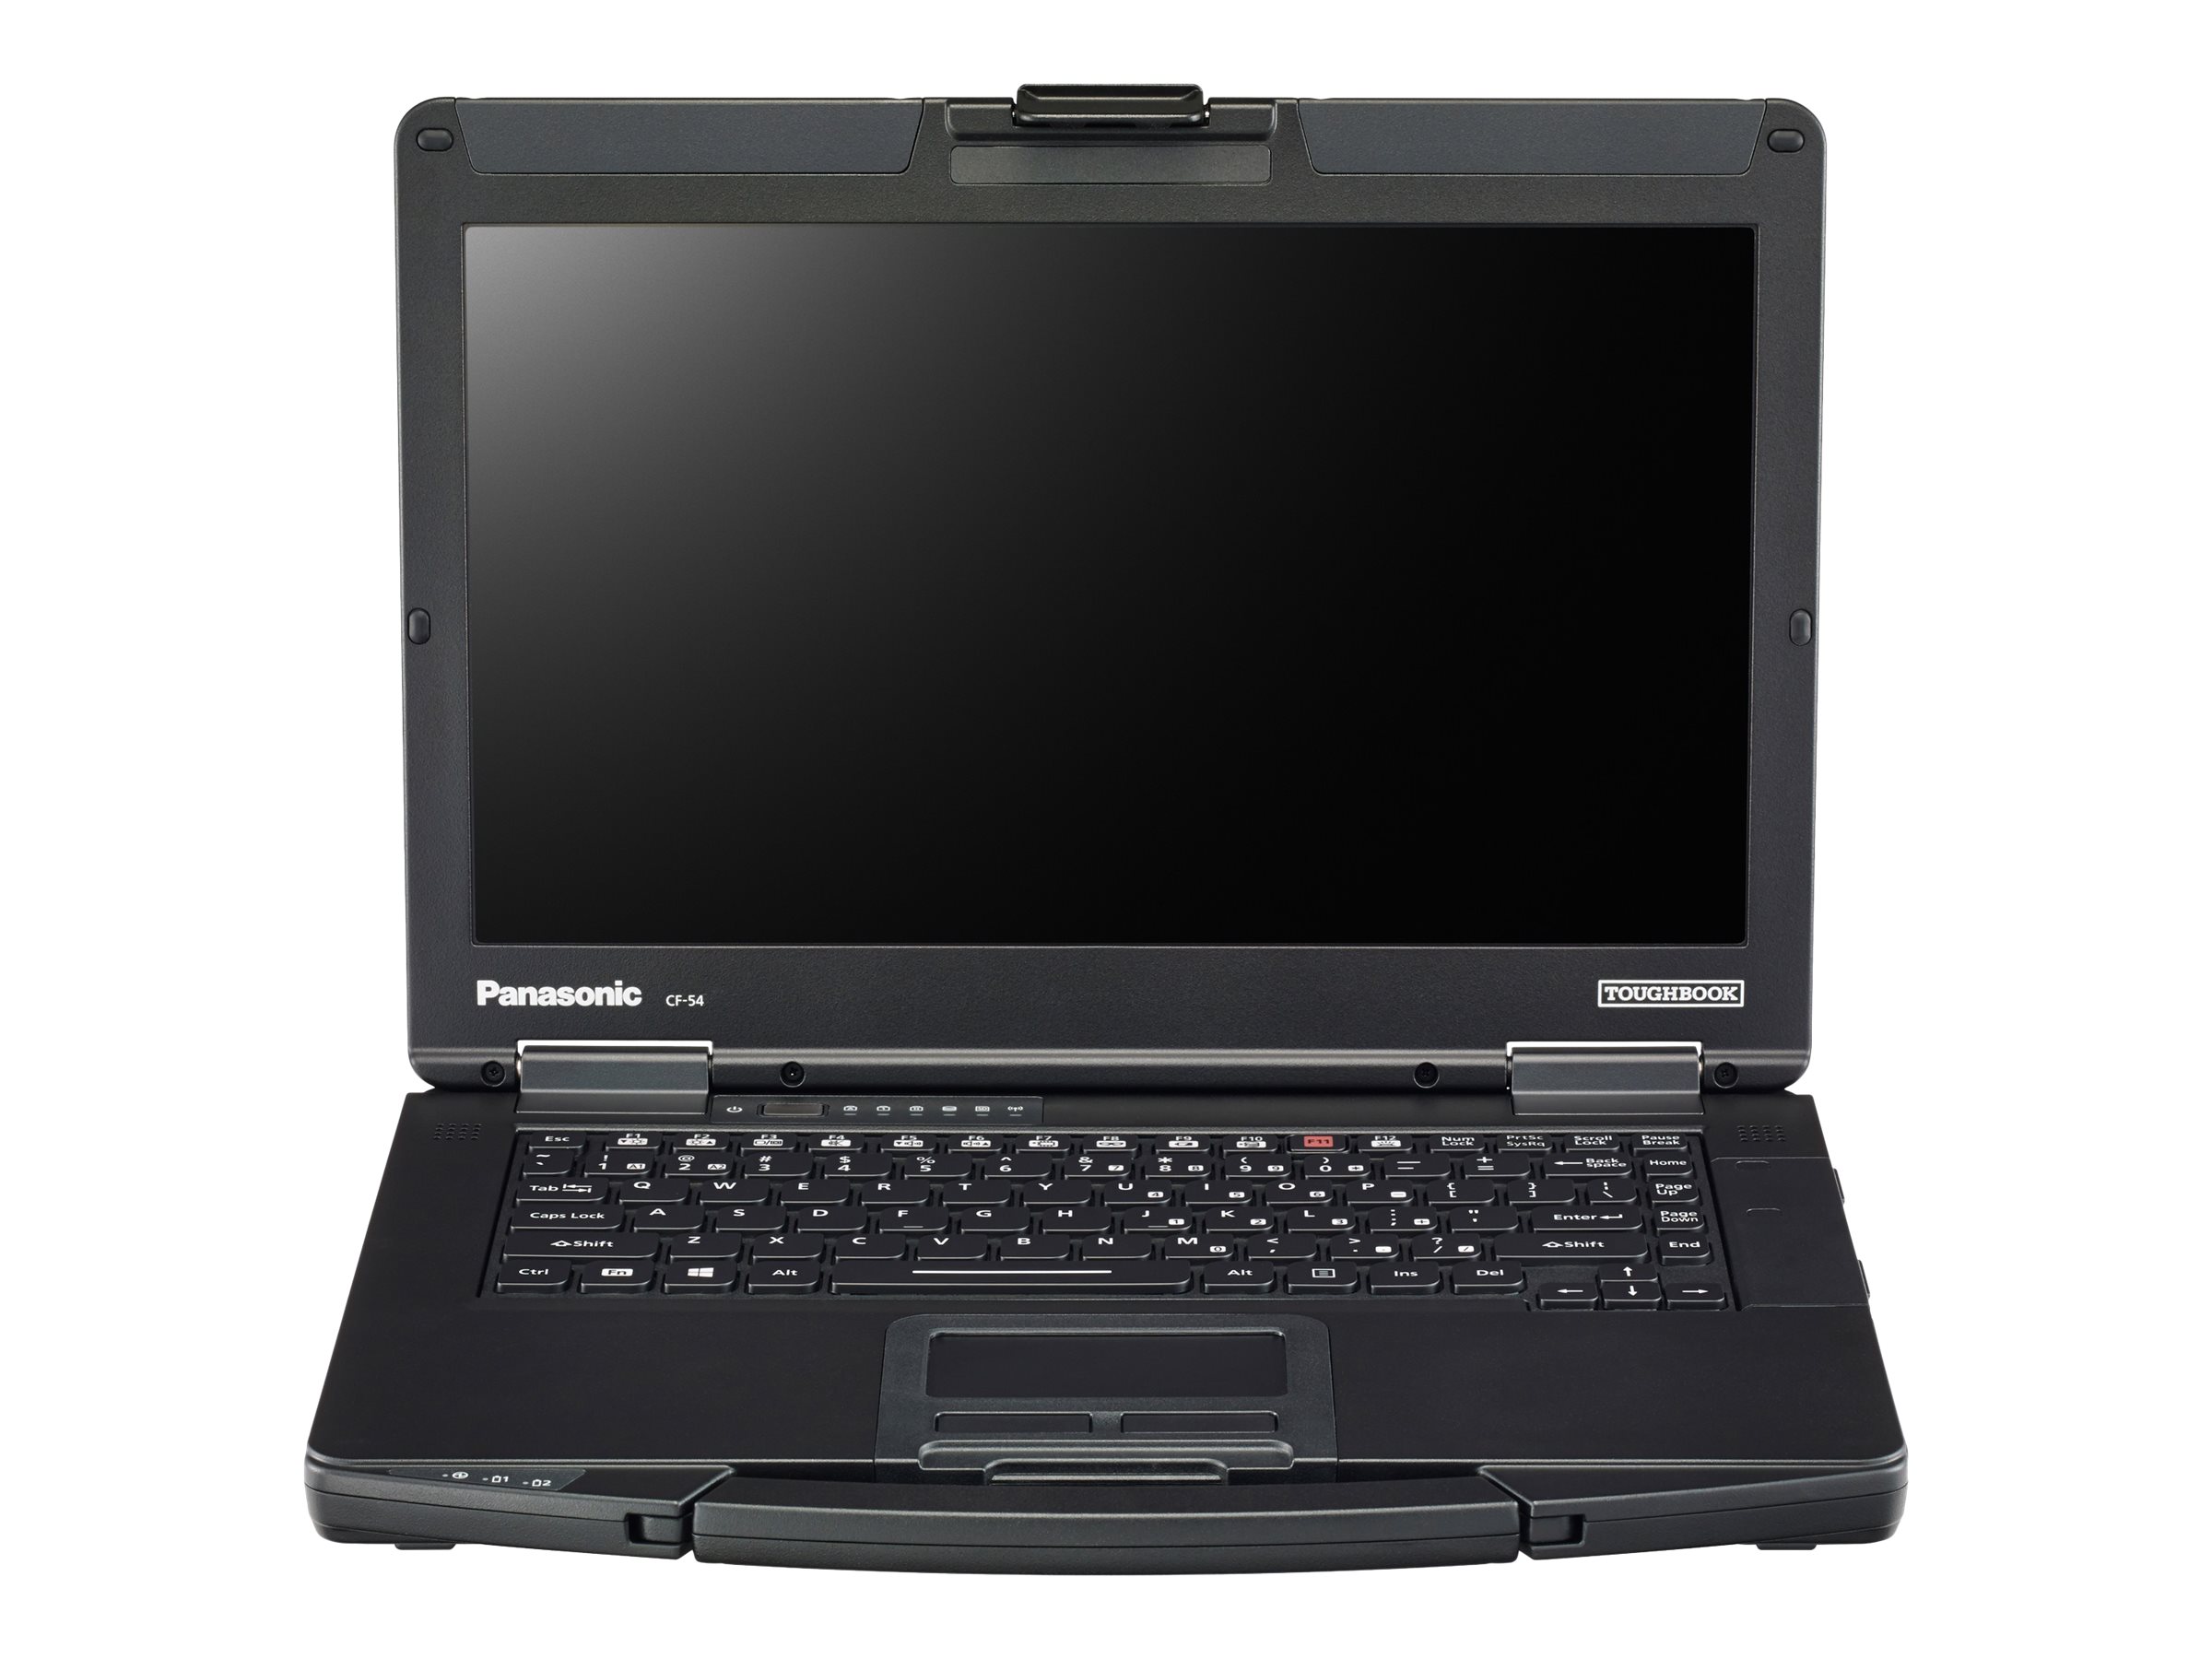 Panasonic Toughbook 54 Prime - Intel Core i5 - 7300U / up to 3.5 GHz - Win 10 Pro 64-bit - HD Graphics 620 - 8 GB RAM - 256 GB SSD - 14" 1366 x 768 (HD) - with Toughbook Preferred - image 3 of 16